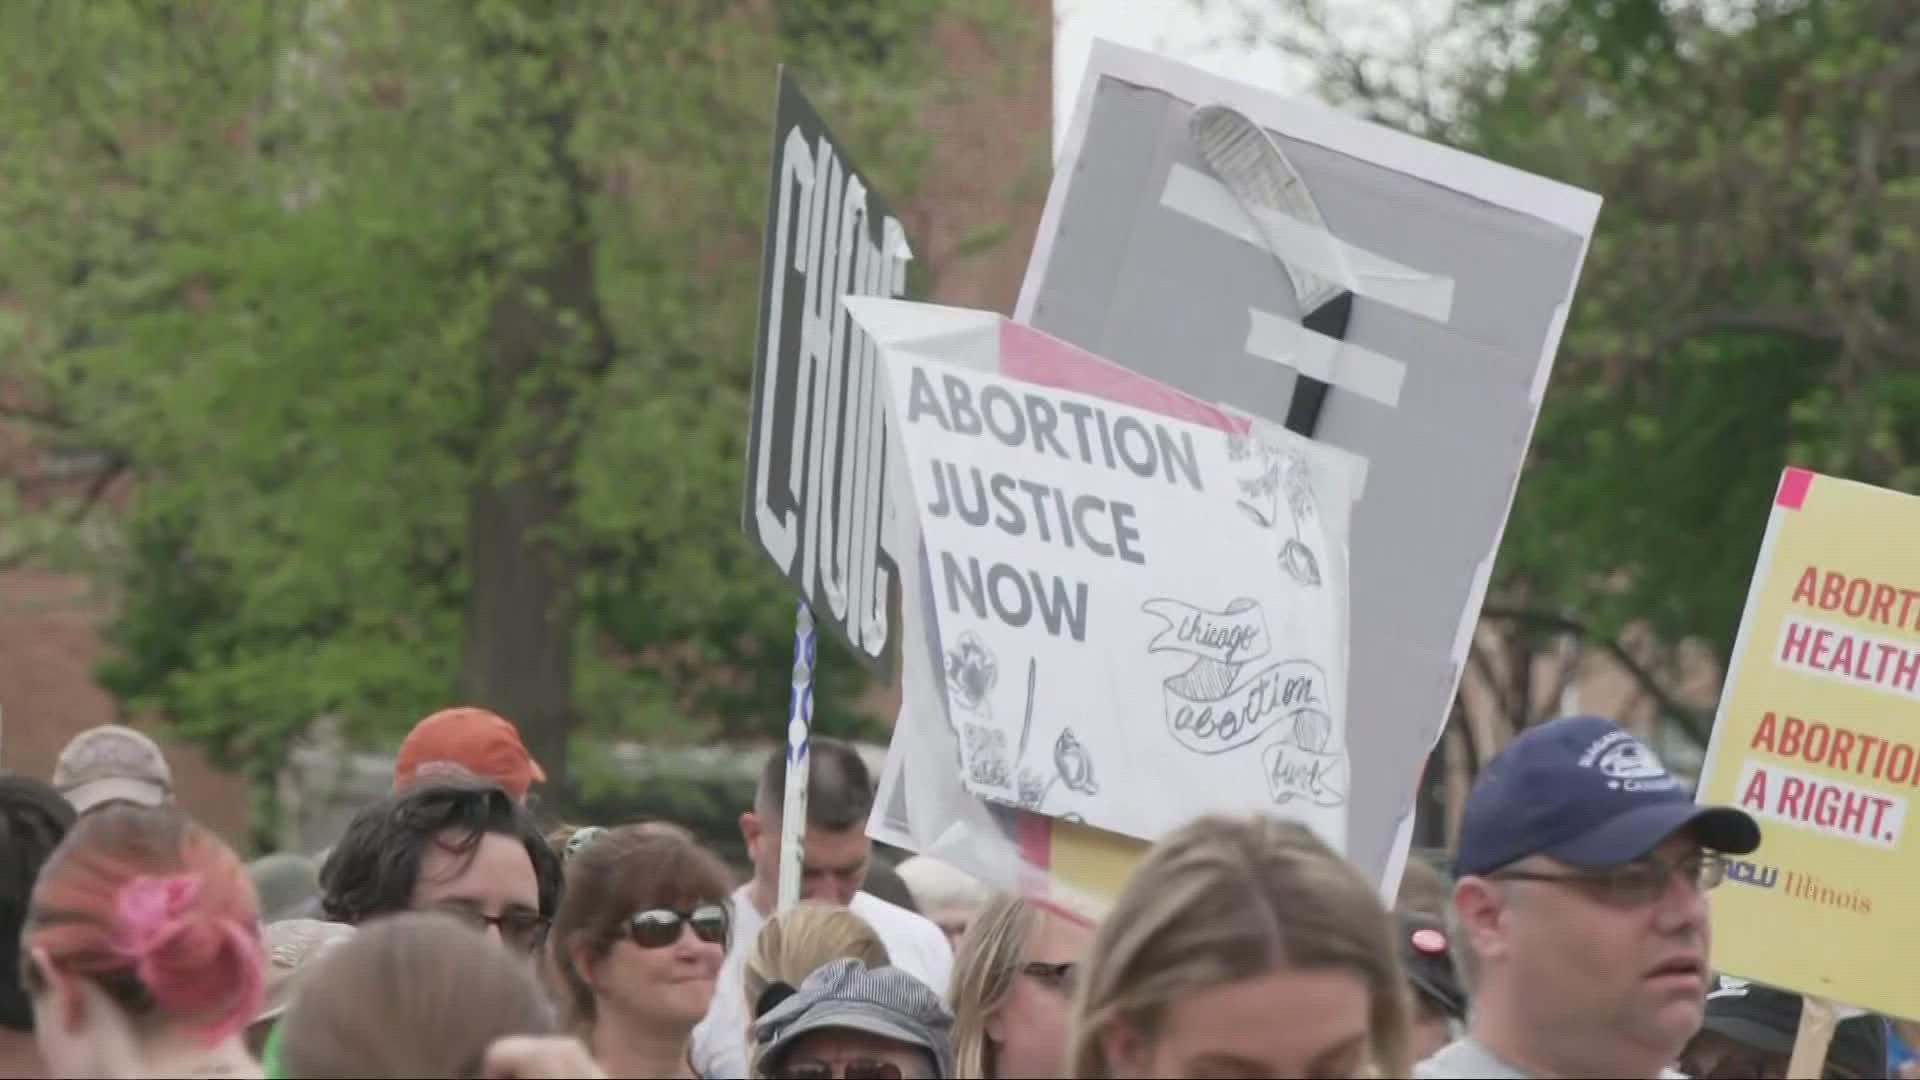 The gathering came as the U.S. Supreme Court considers whether or not to overturn Roe v. Wade.